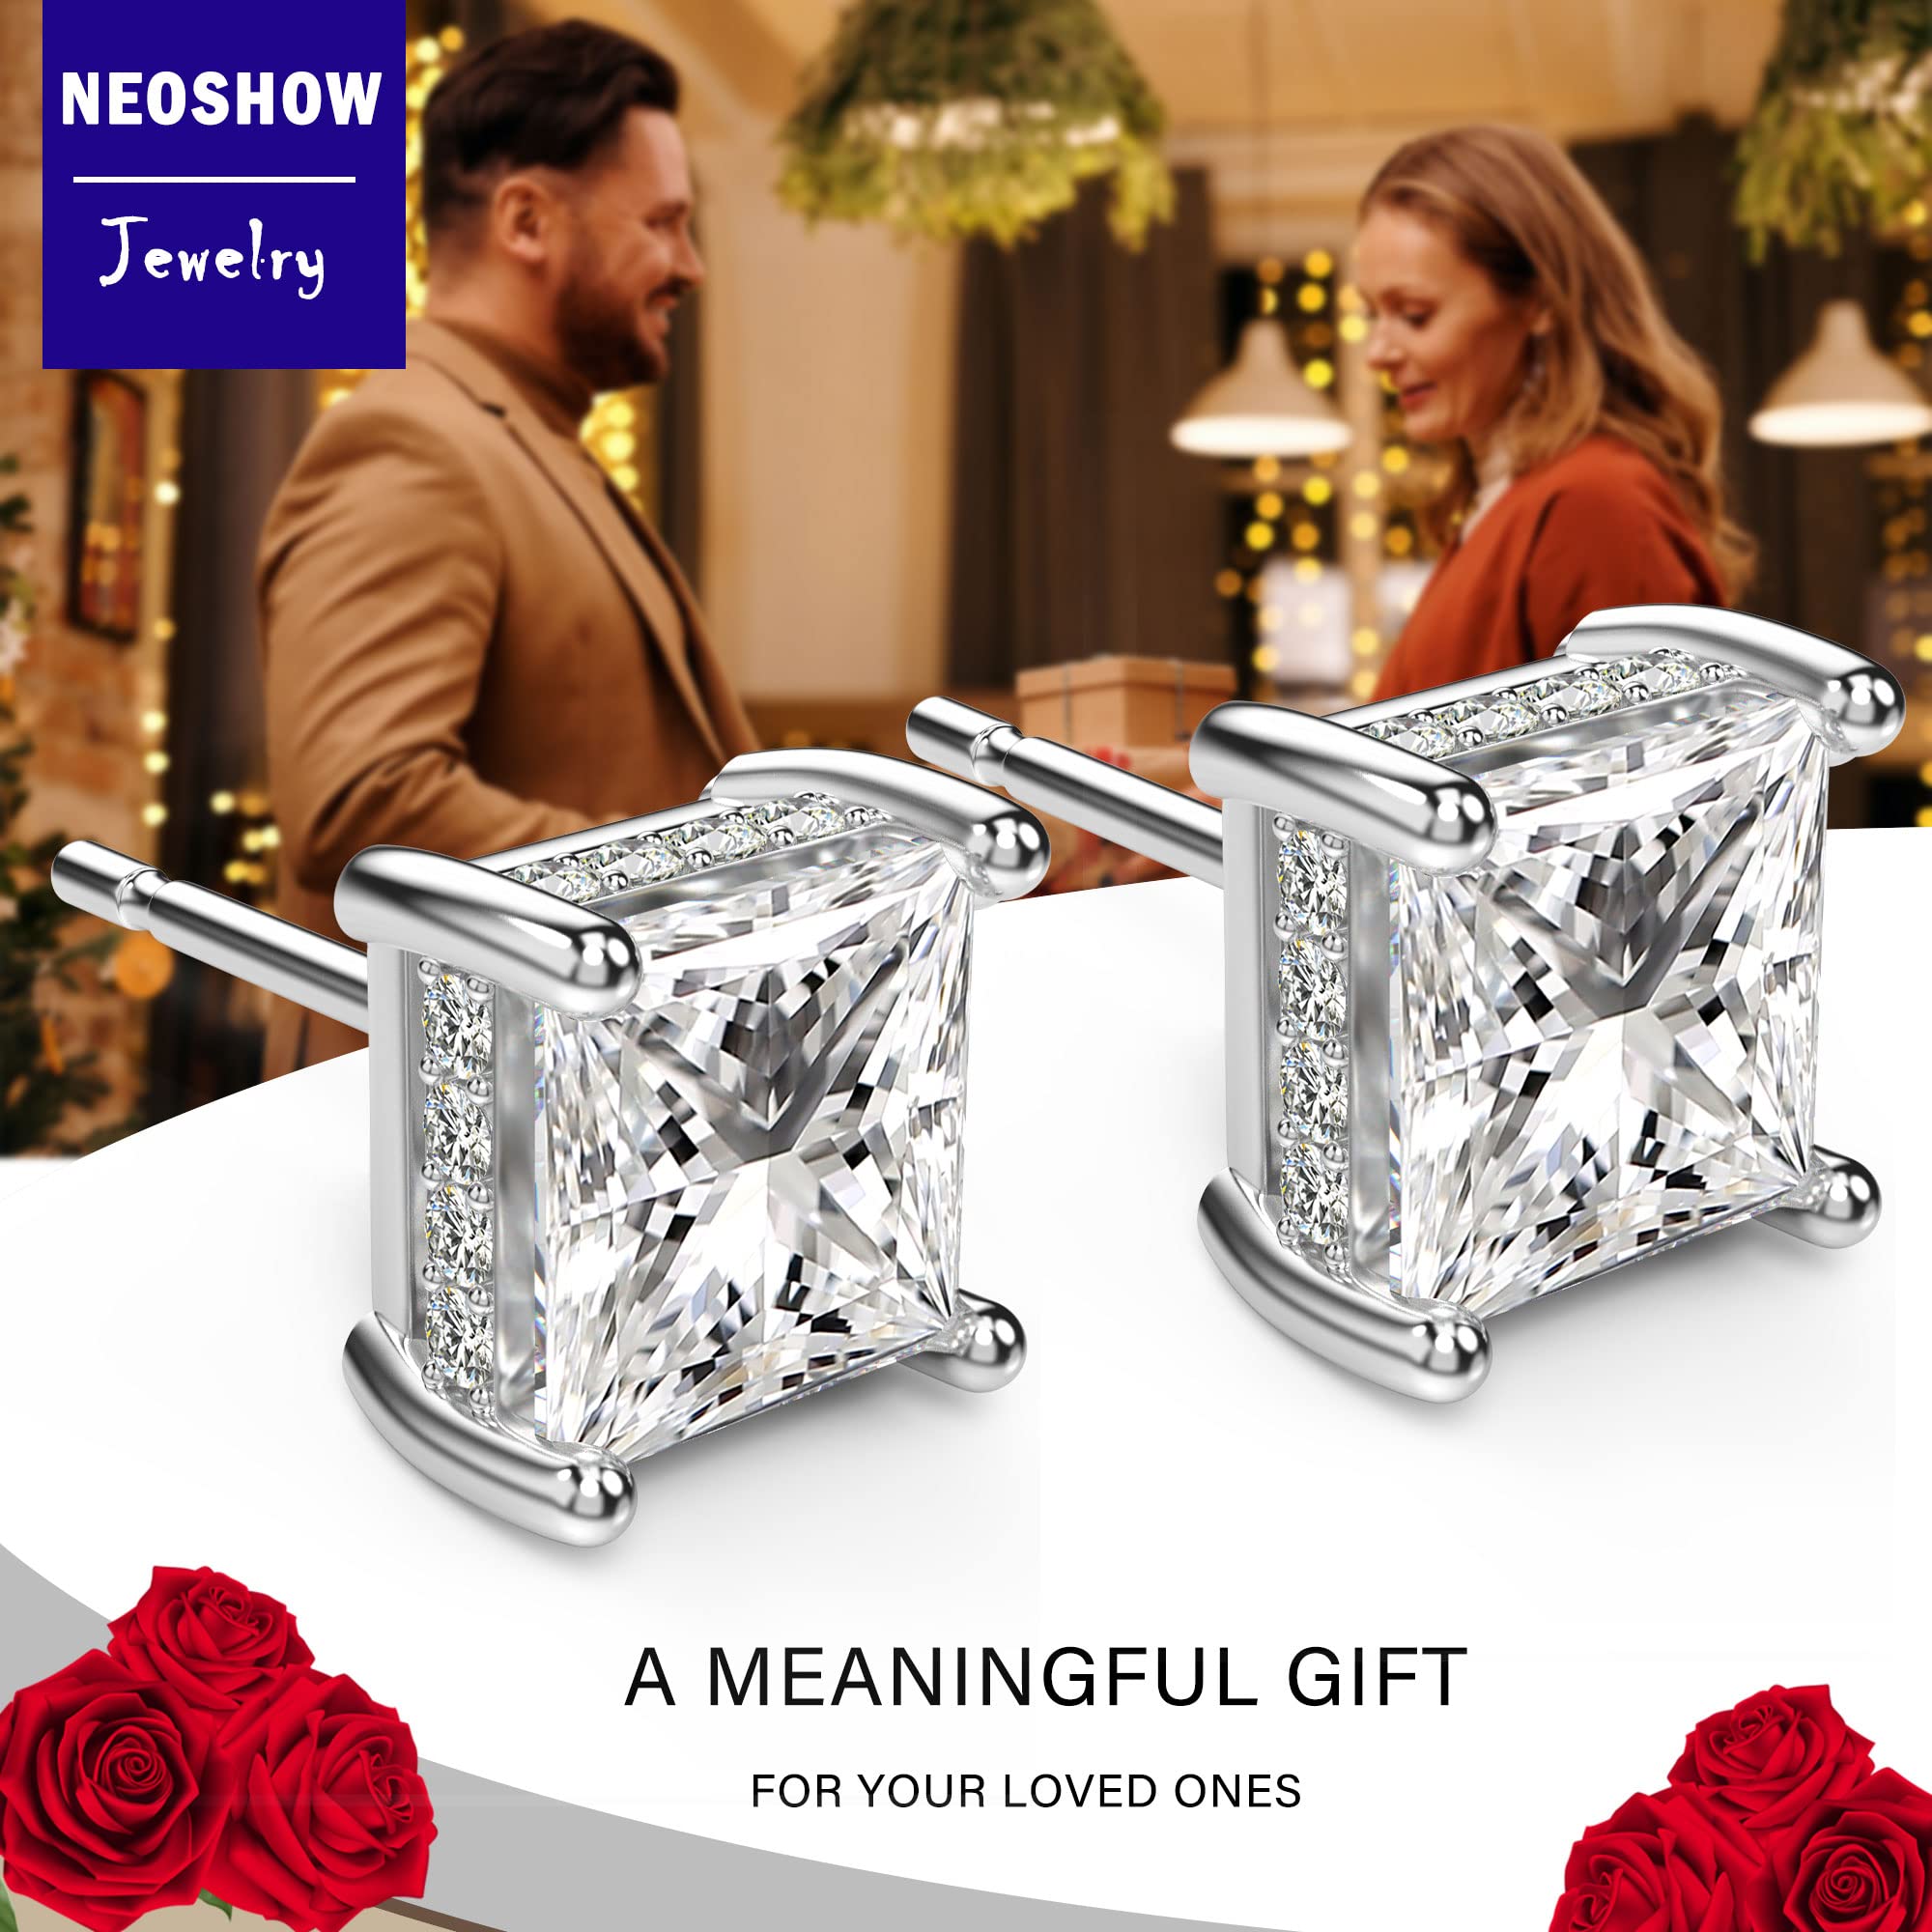 18K White Gold Plated Sterling Silver Princess Cut Cubic Zirconia Stud Earrings Square Simulated Diamond CZ Stud Earrings for Women Men Hypoallergenic